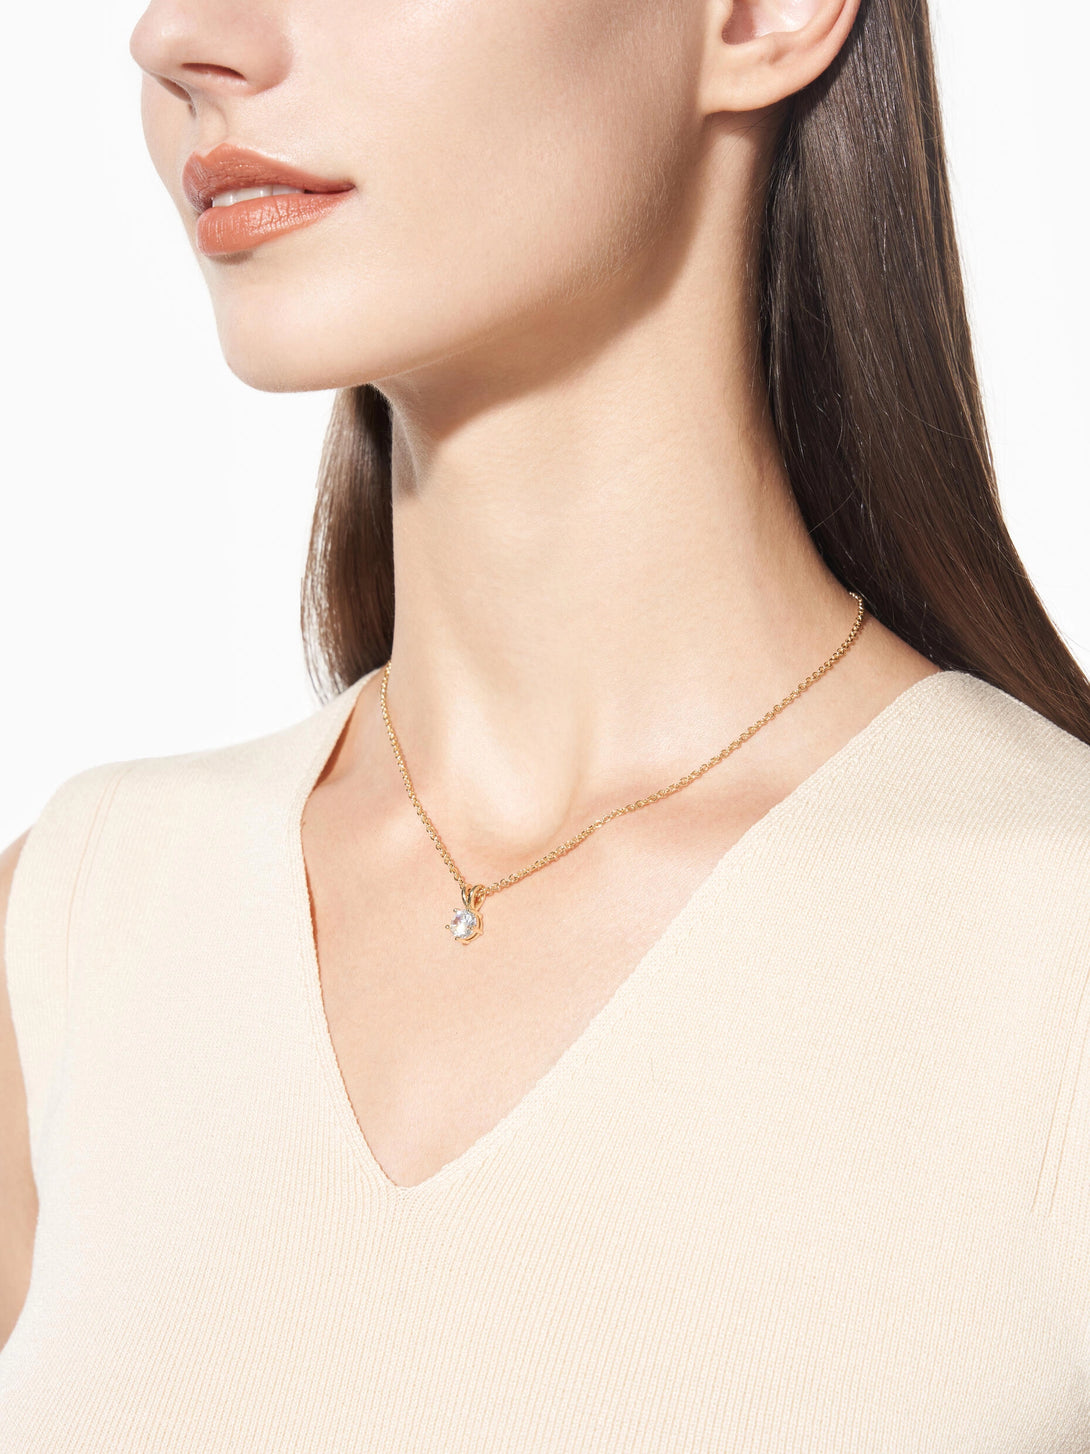 Daily Solitaire Delicate Necklace - OOTDY